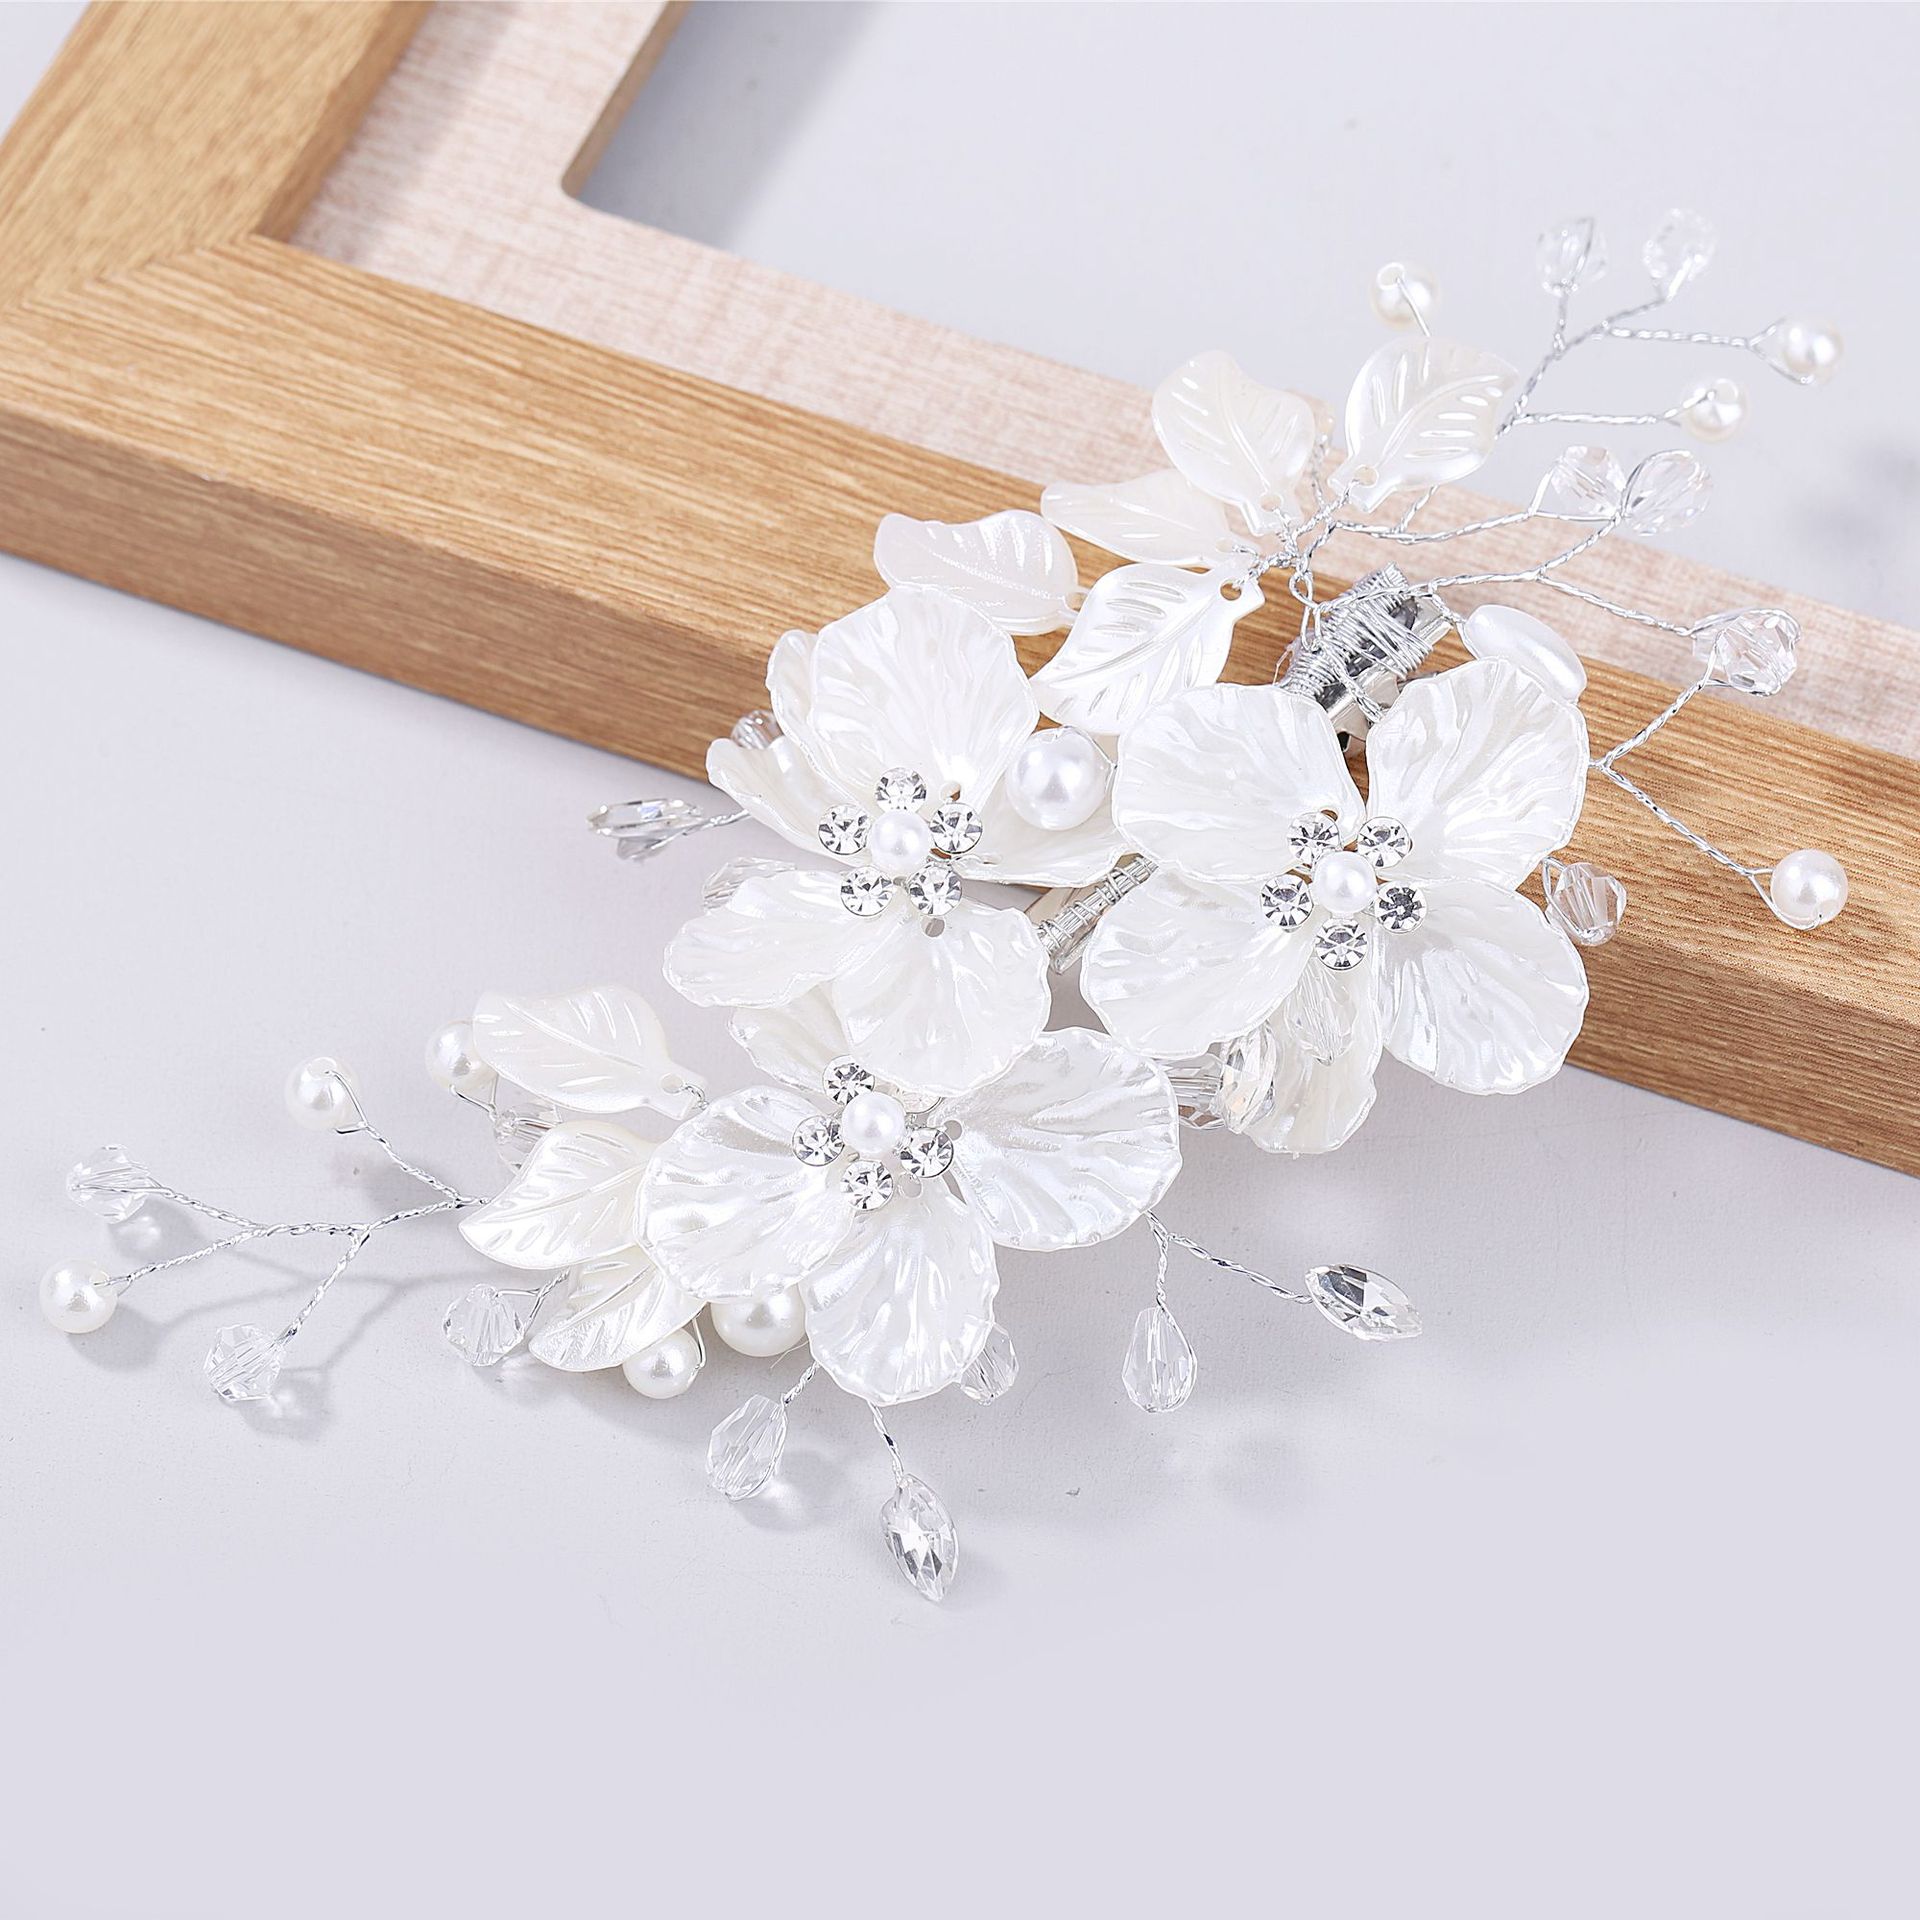 1:Silver thread with white flowers